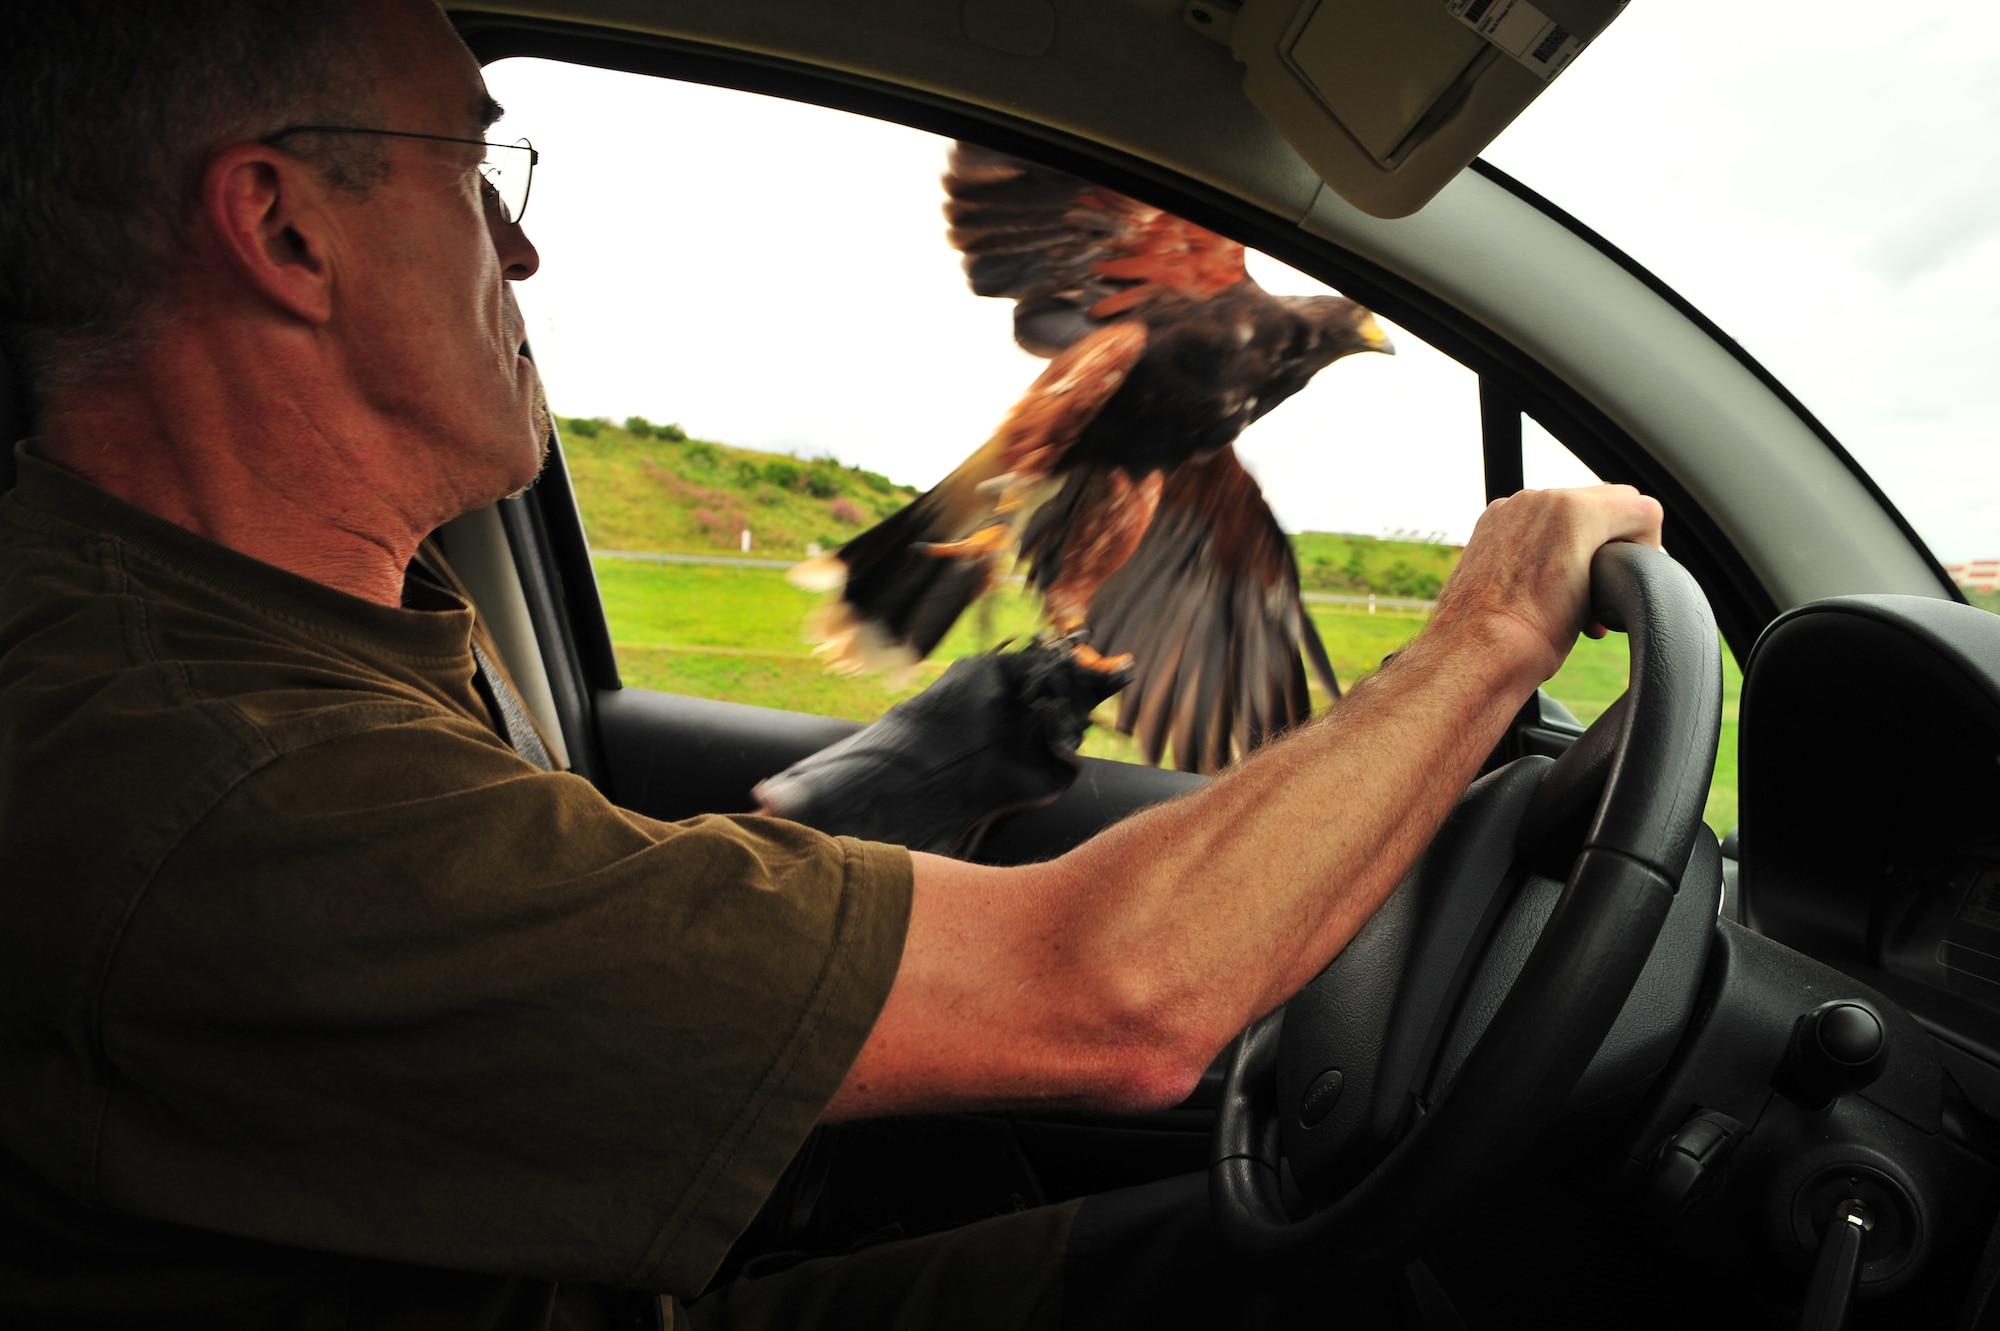 SPANGDAHLEM AIR BASE, Germany – Roland Leu, 52nd Fighter Wing falconer, throws his hunting falcon out of his patrol car on Perimeter Road here July 31. Leu is the wing’s only falconer and he uses his four falcons to hunt birds and rodents throughout the year. The falconer keeps rodent and bird populations clear of aircraft and helps reduce the amount of damage and cost of repairs done to aircraft. (U.S. Air Force photo by Airman 1st Class Dillon Davis/Released)